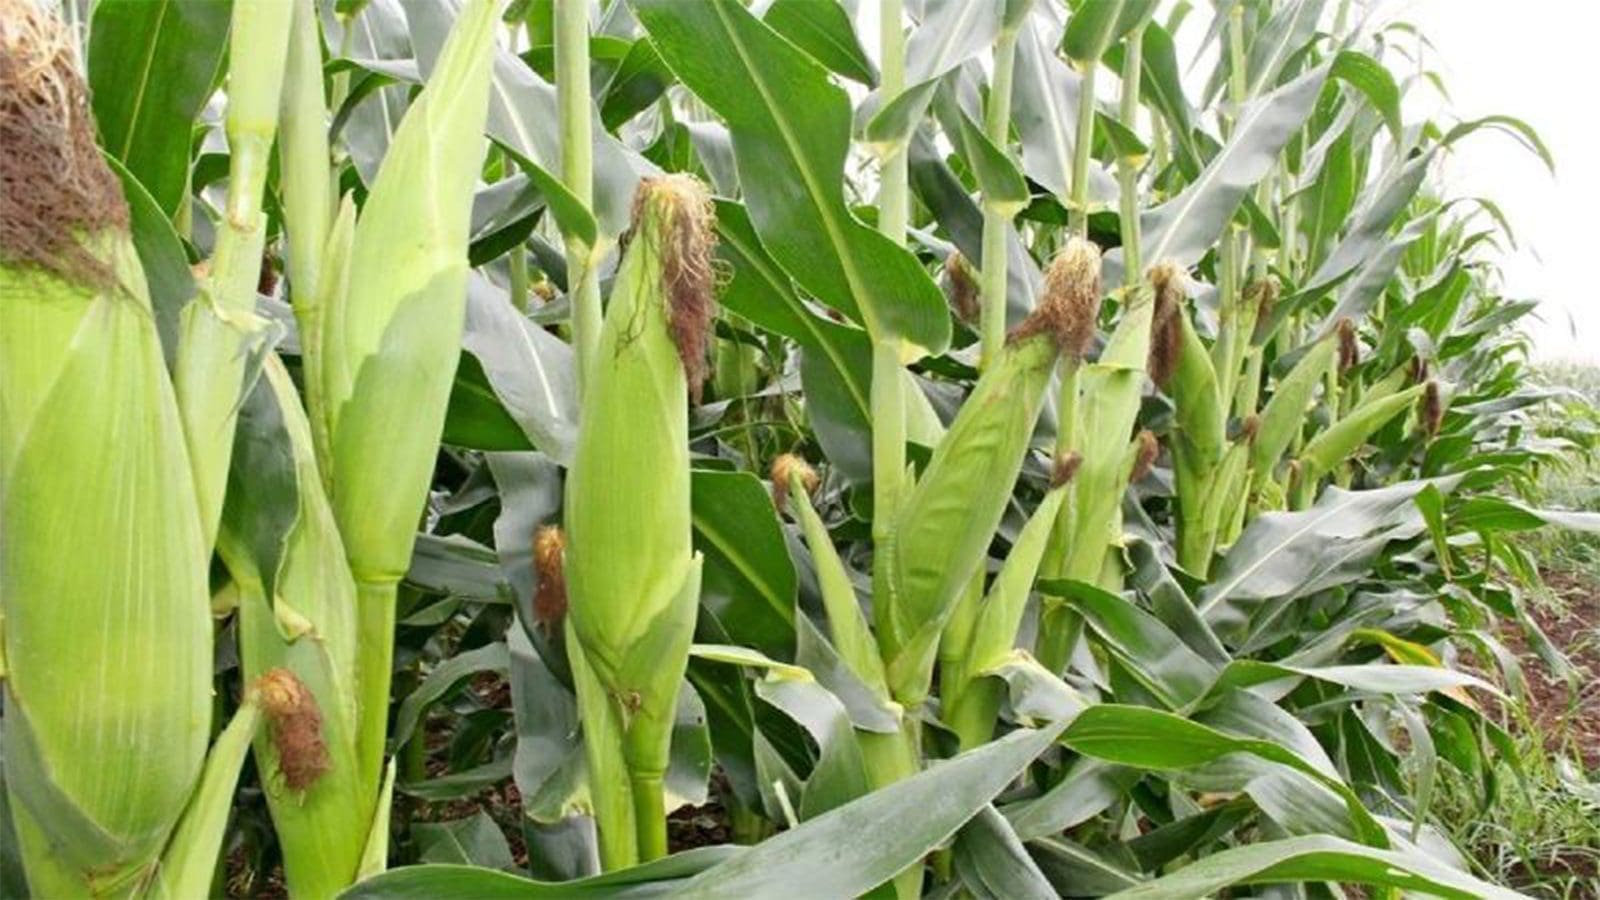 Tanzania seeks to seize maize trade opportunity as drought wreaks havoc on major maize producers